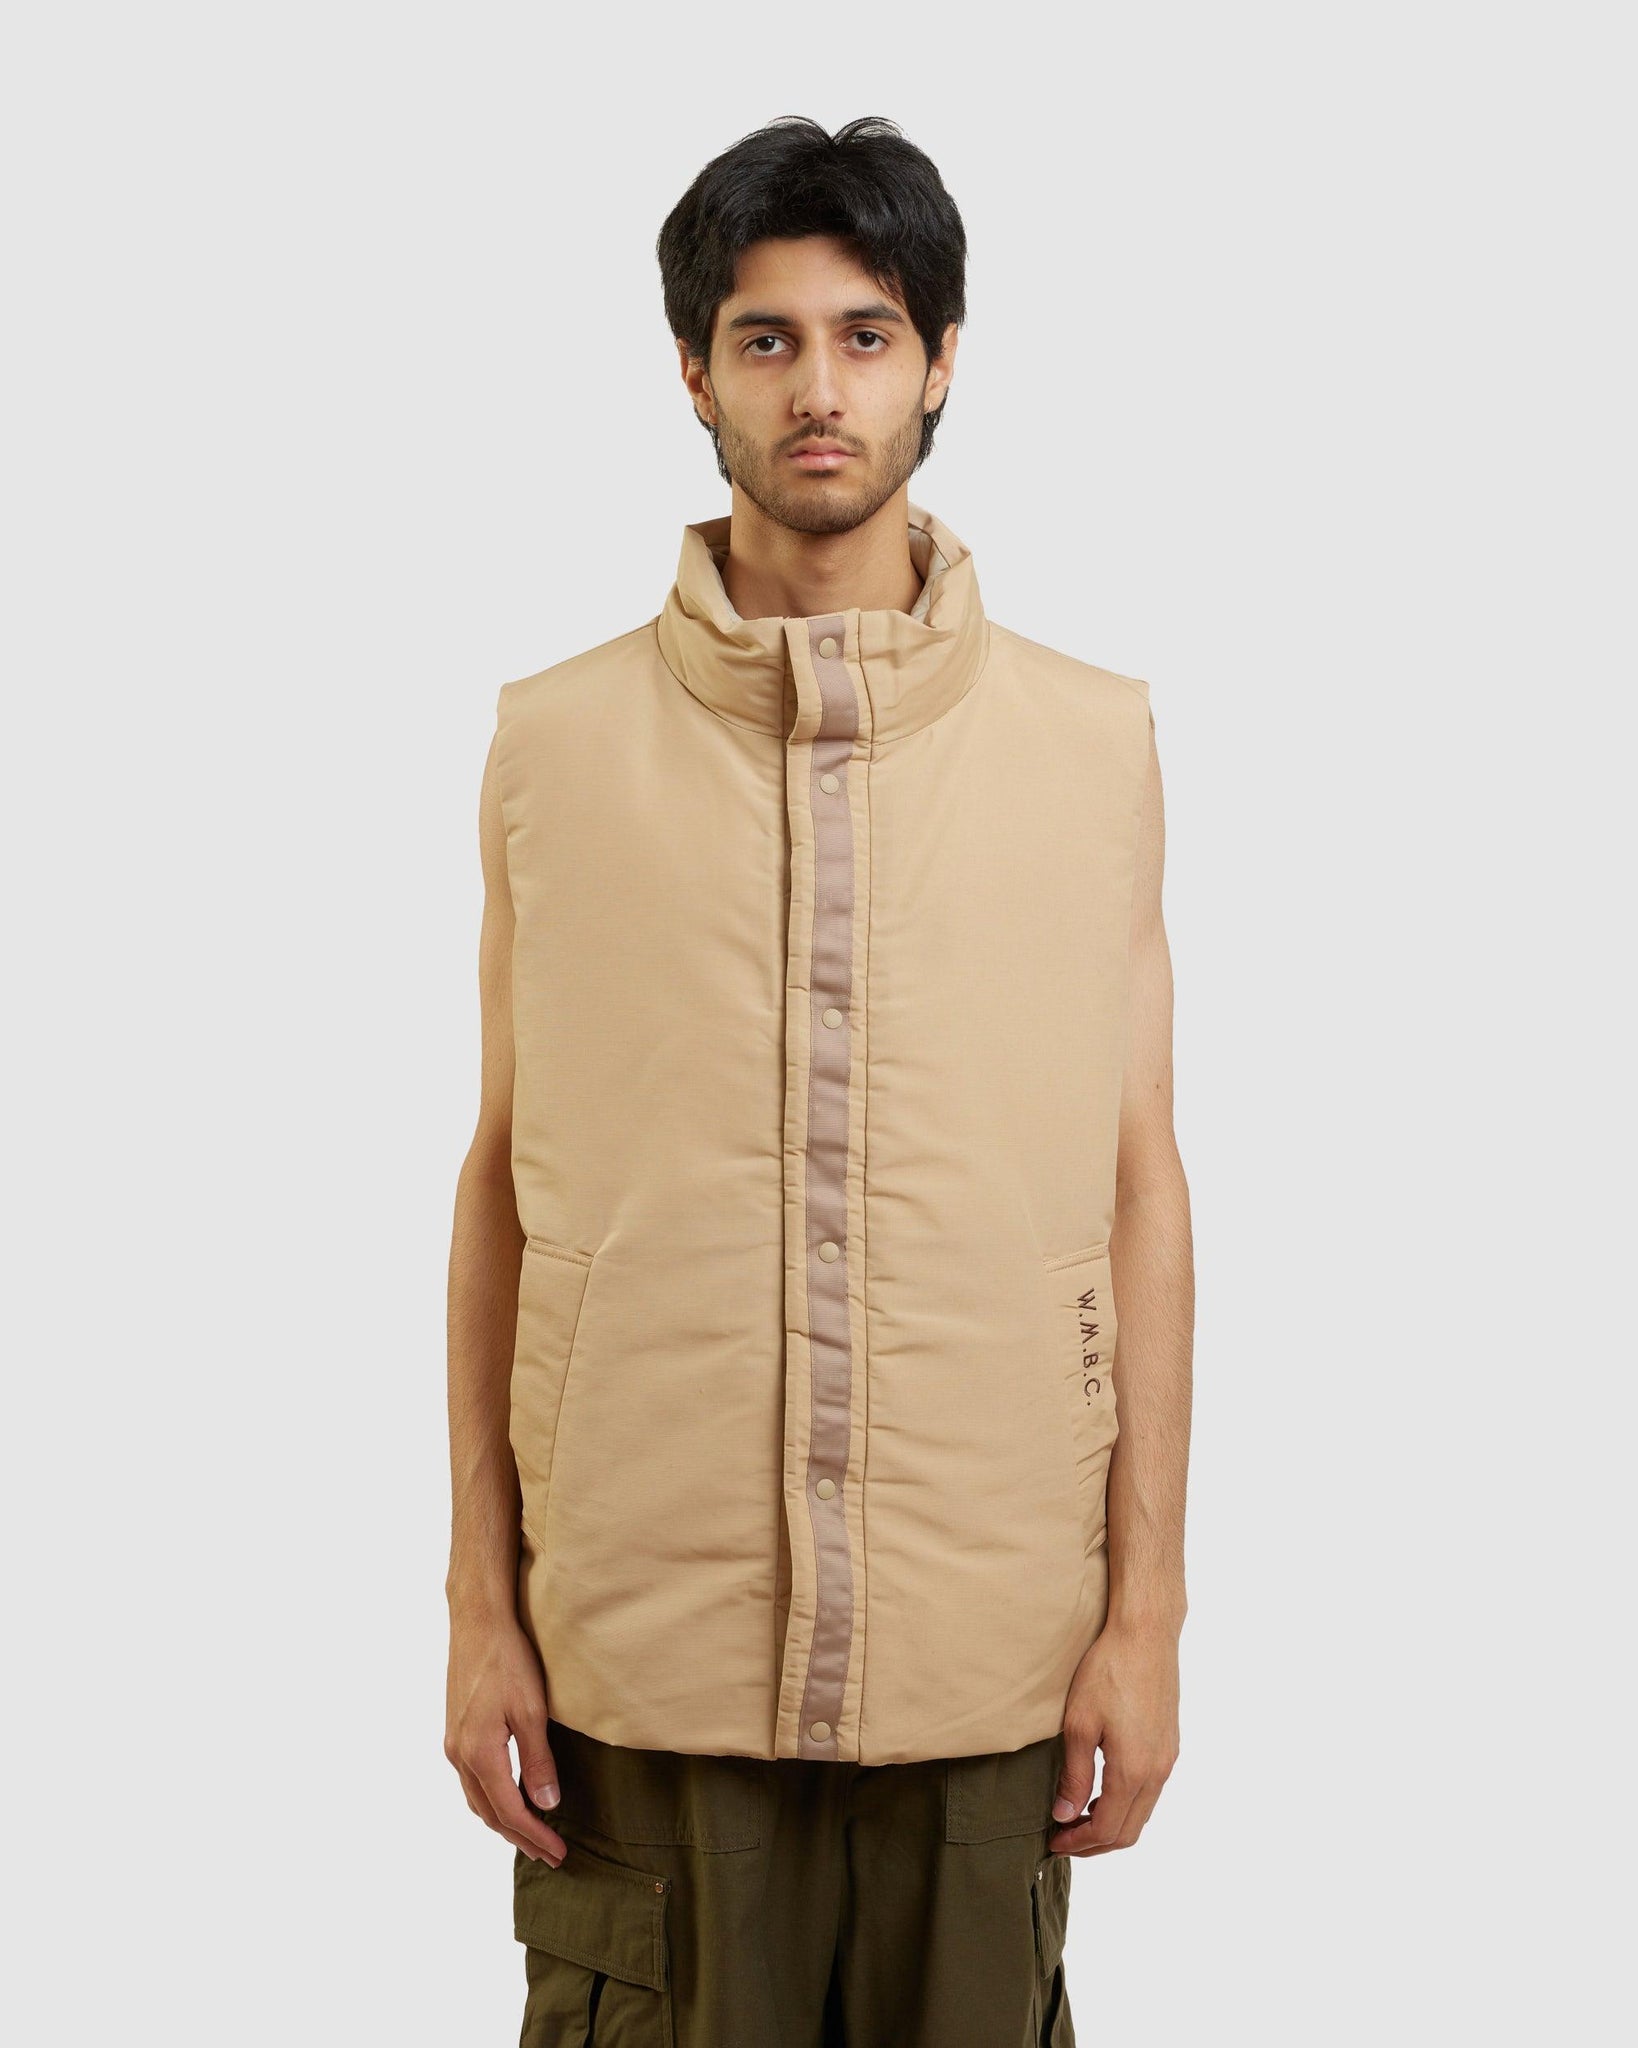 White Mountaineering V-neck long-sleeve jacket - Brown